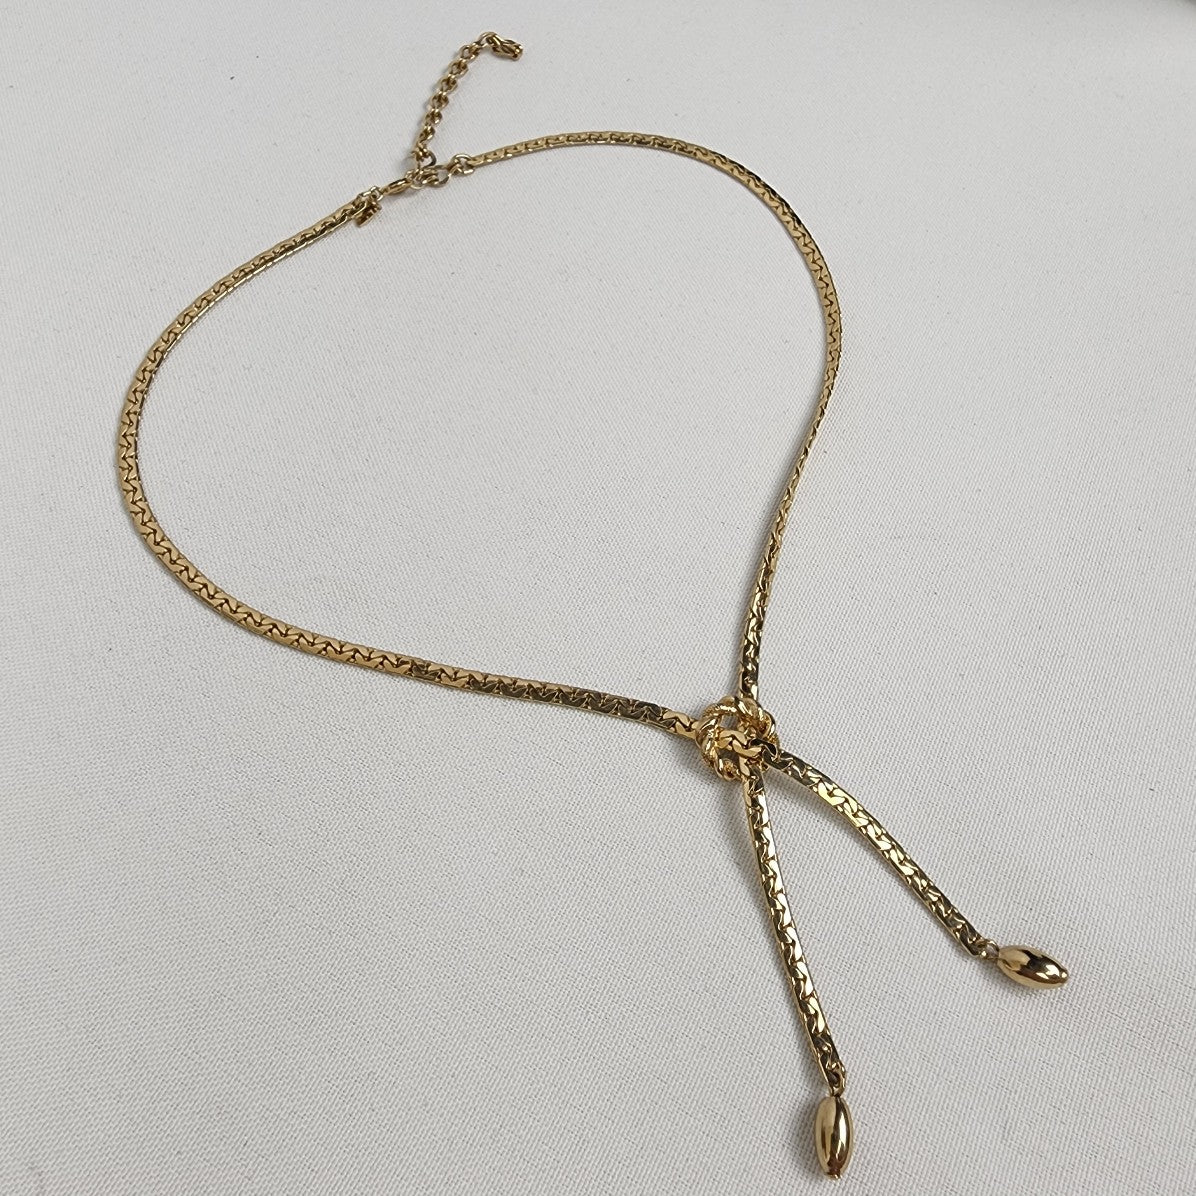 Vintage Sarah Coventry Gold Tone Rope Detail Necklace